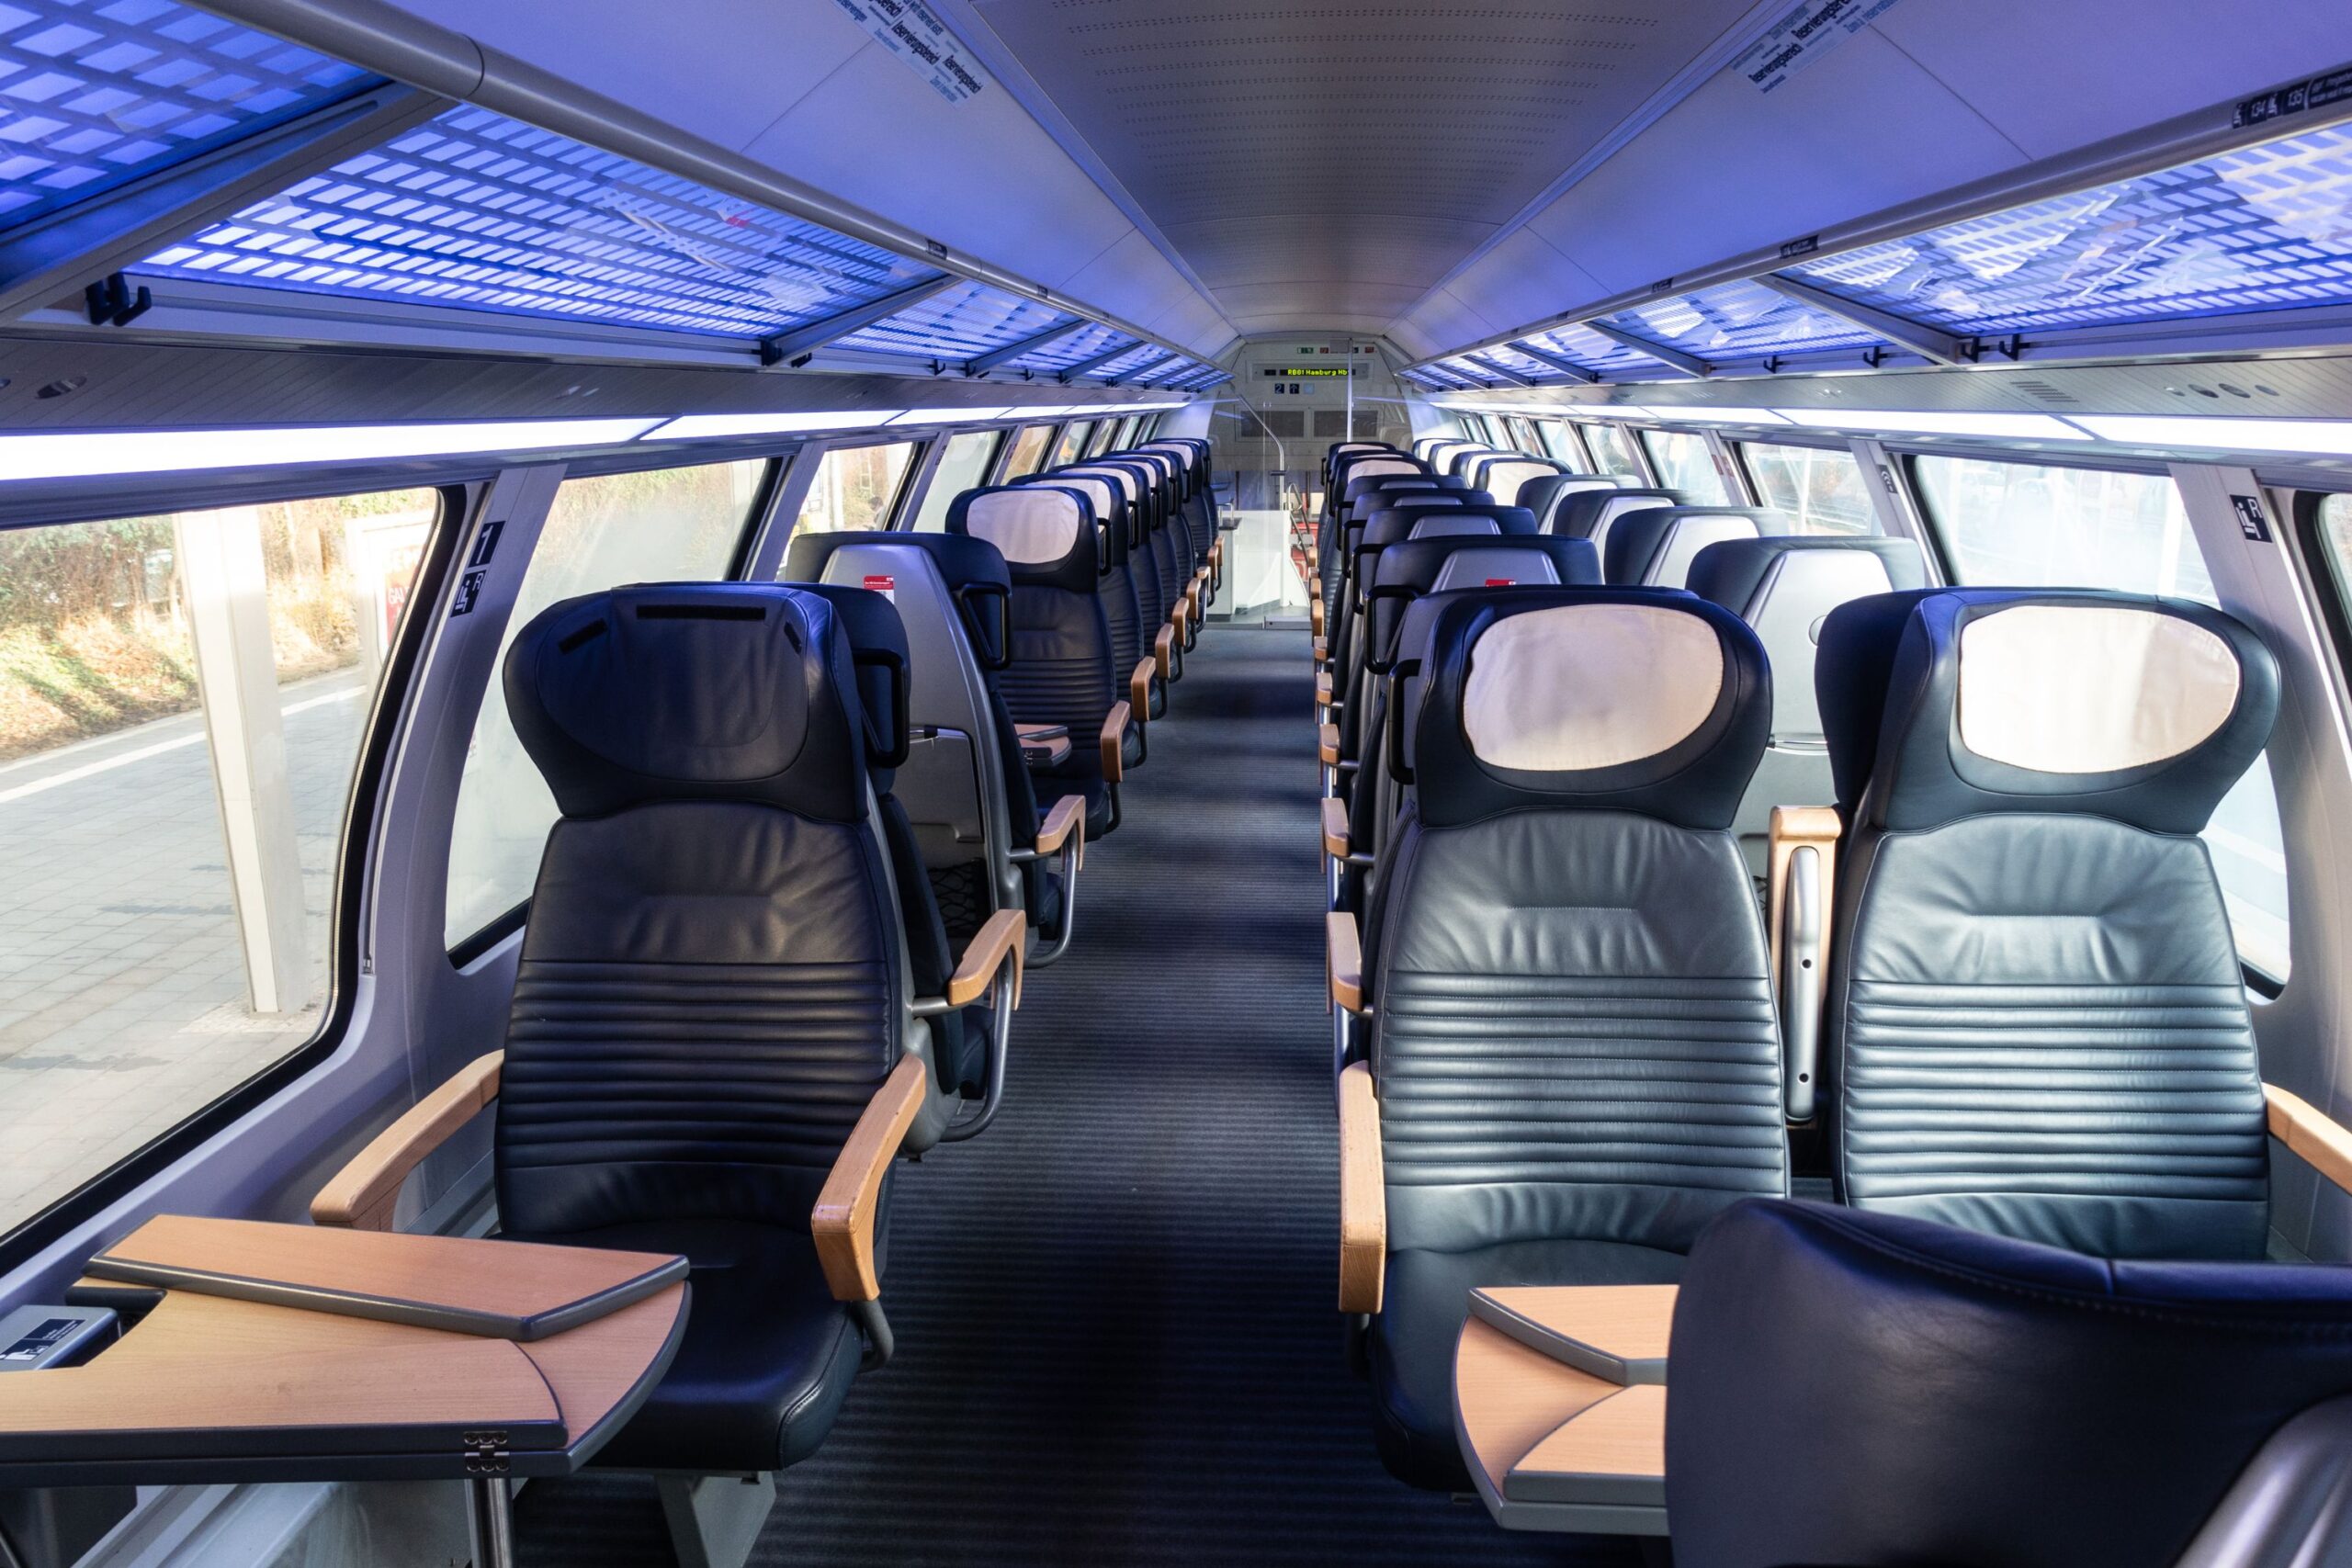 What are the different types of seats on German trains